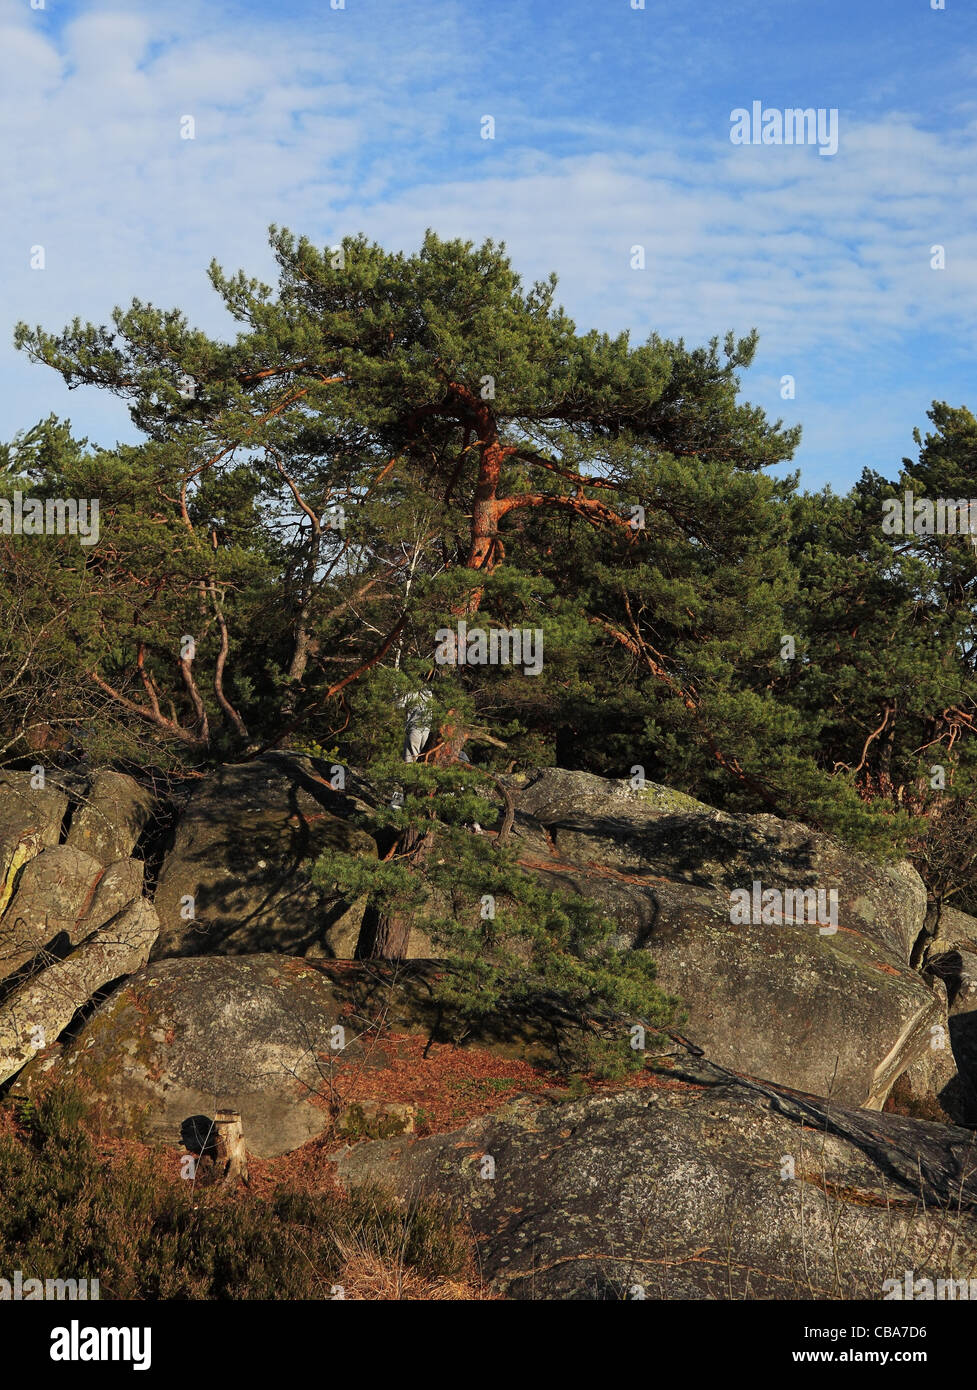 Image of a Scots Pine (Pinus sylvestris) in the Gorges of Franchard in the forest of Fontainebleau in the early spring. Stock Photo